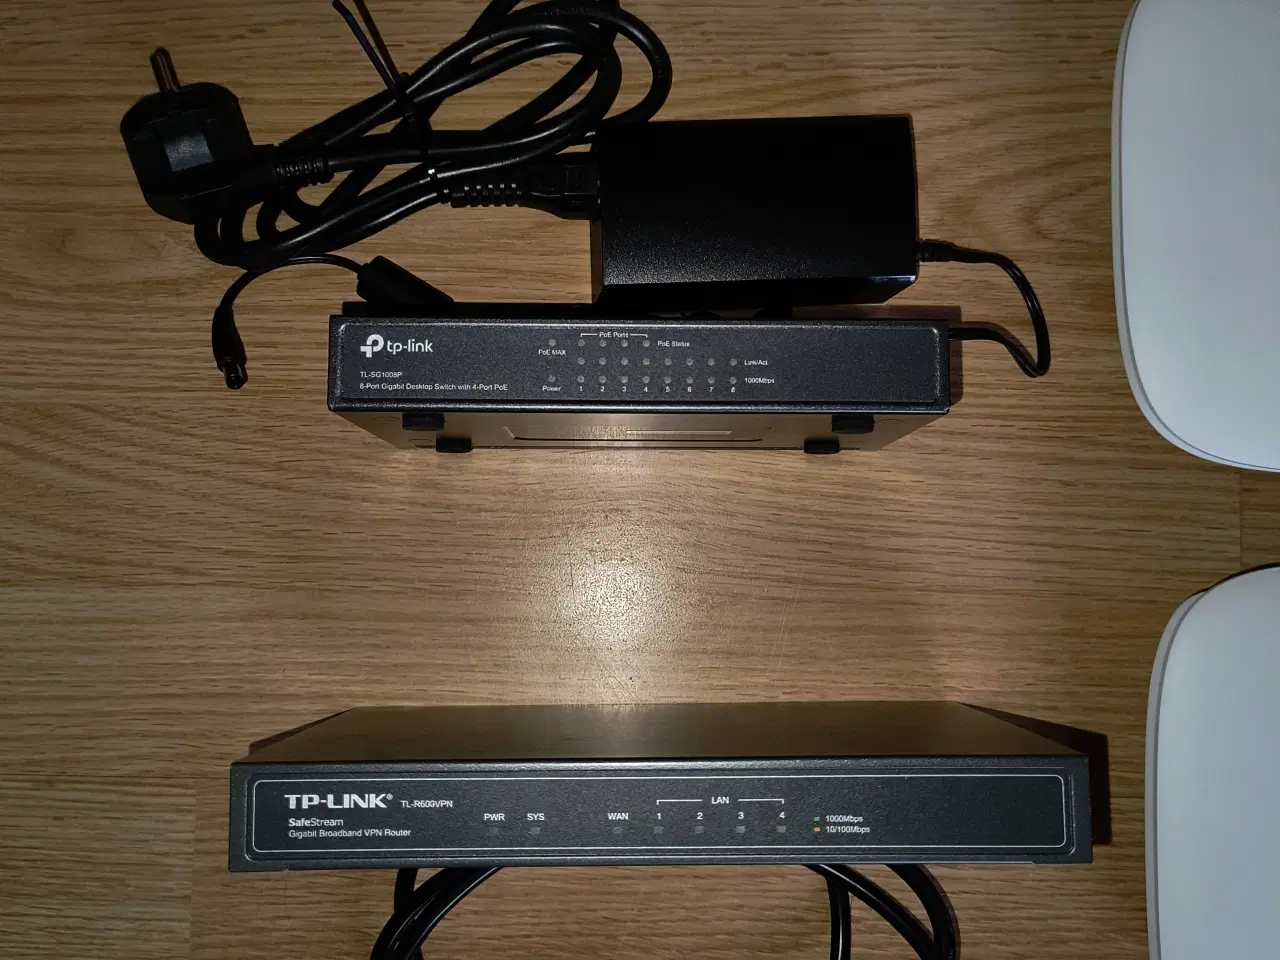 Billede 1 - Router + switch